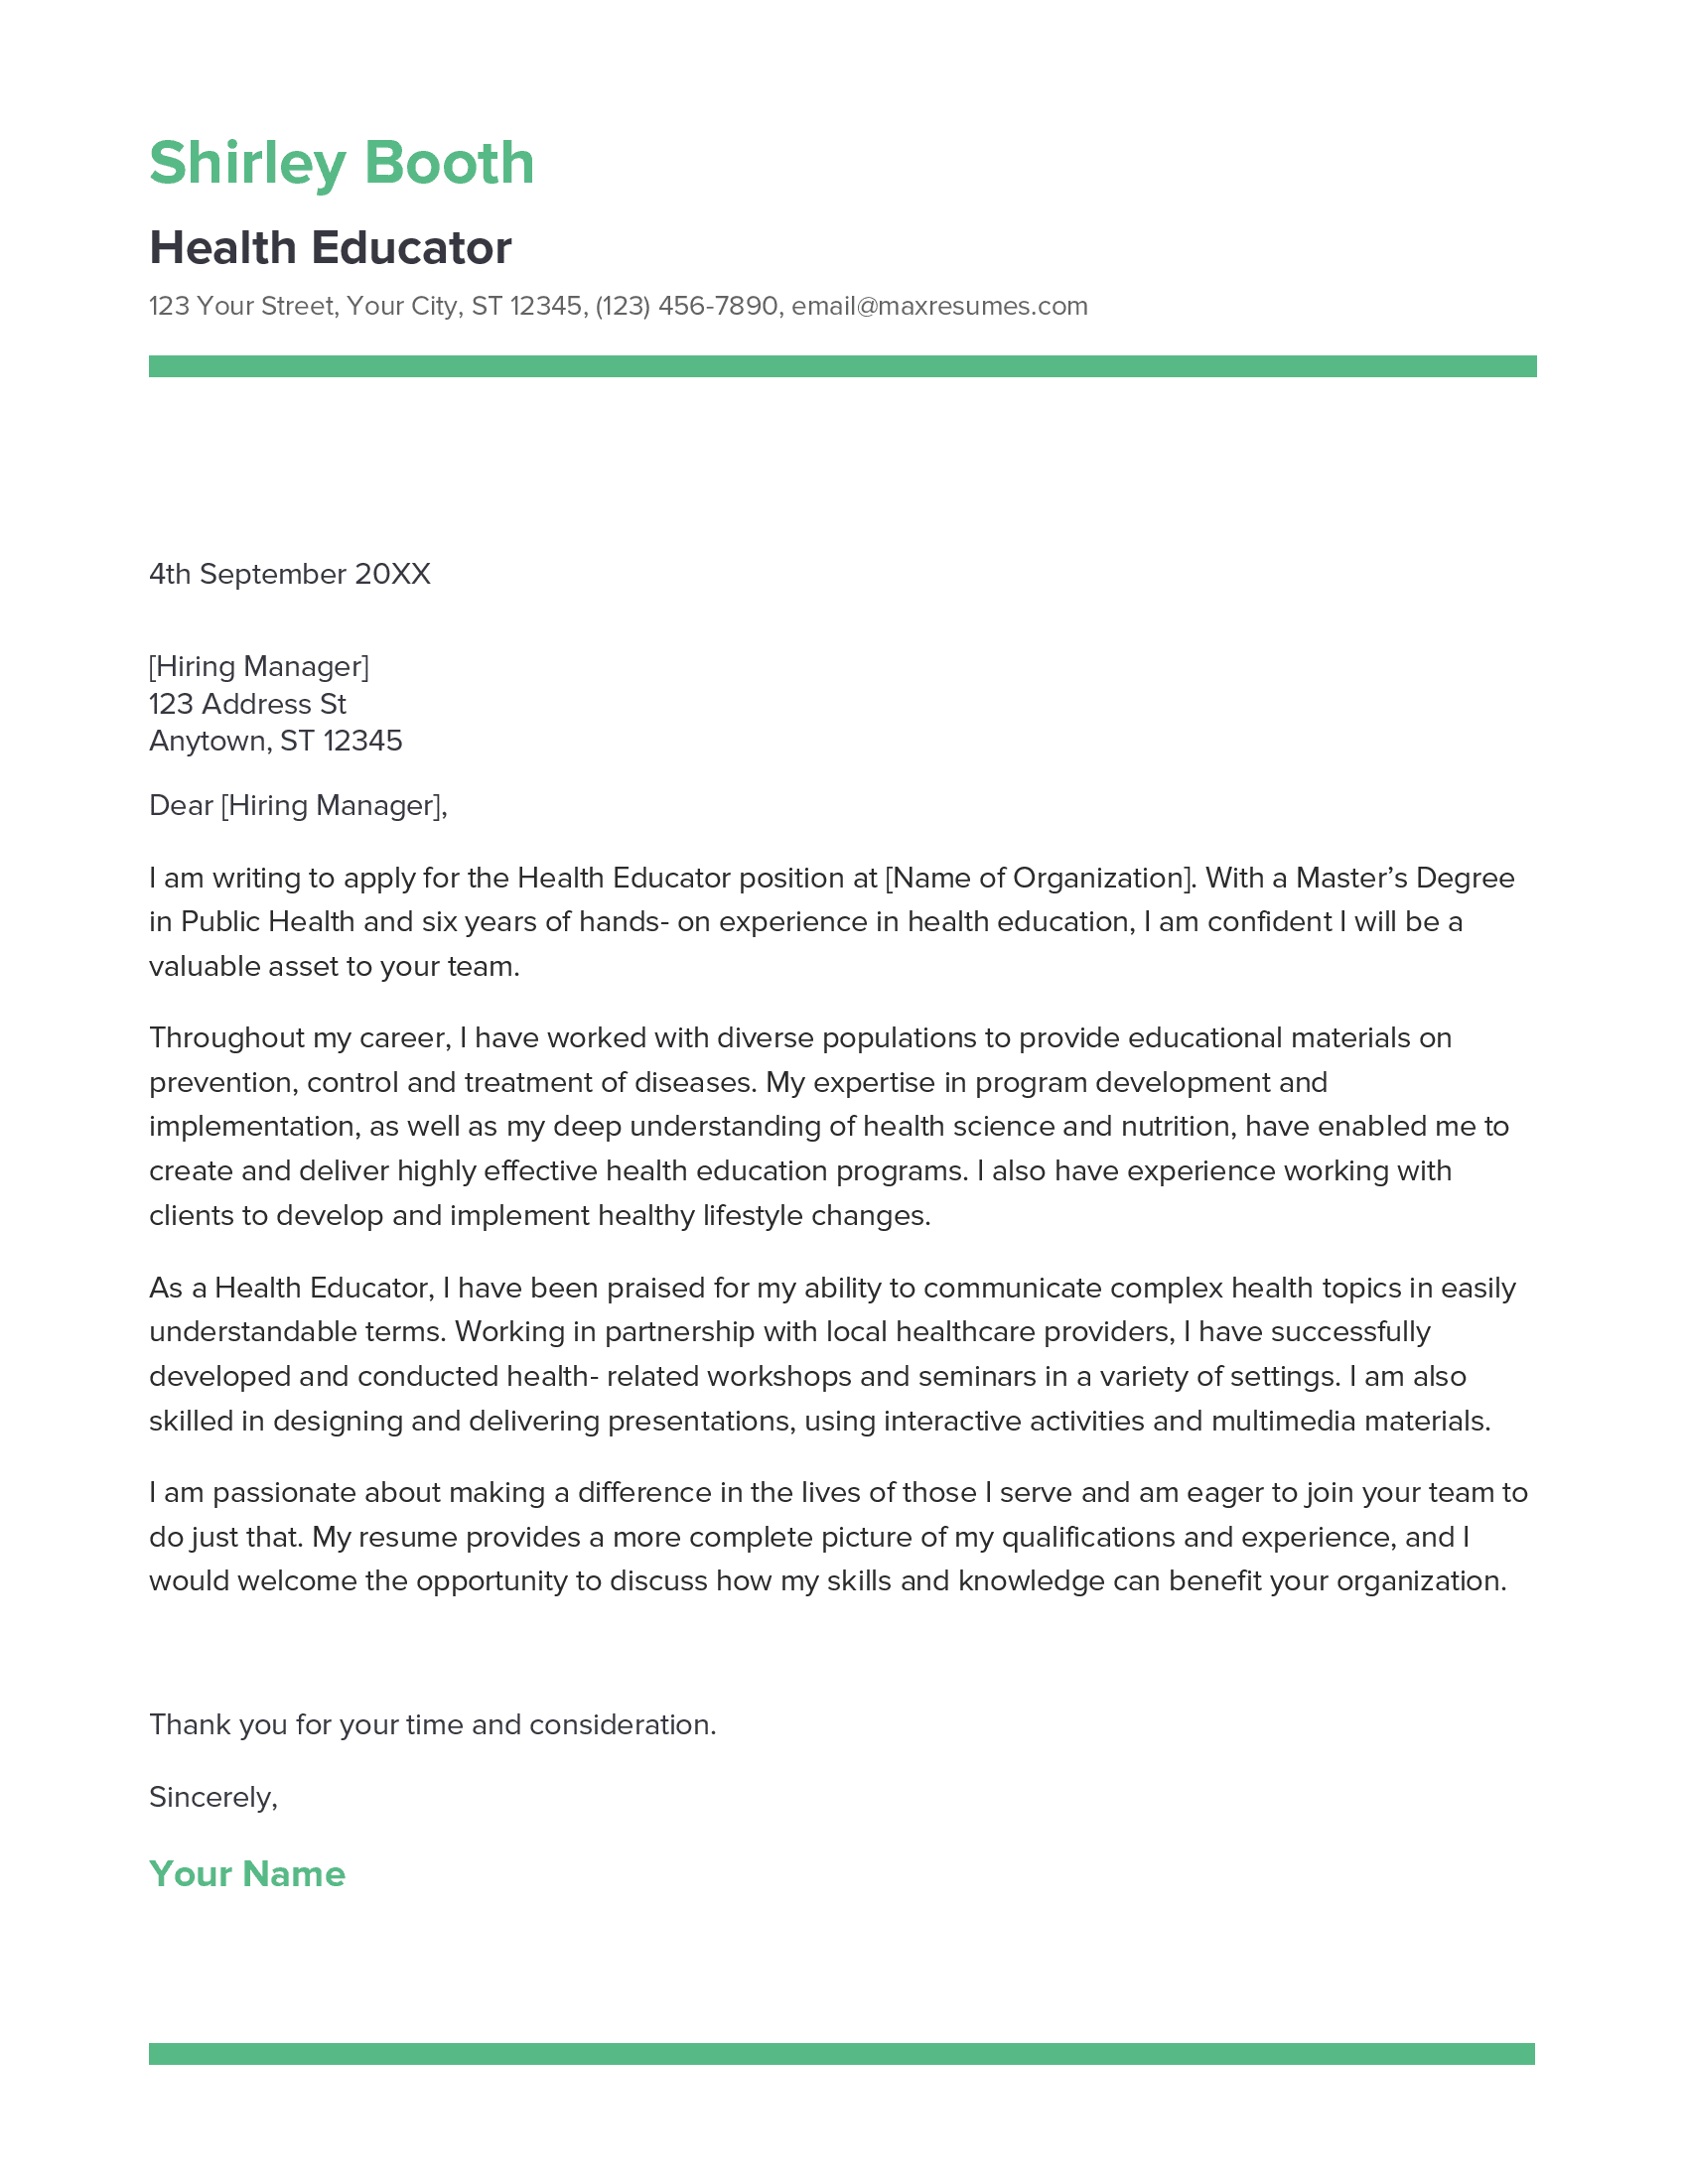 Health Educator Cover Letter Example